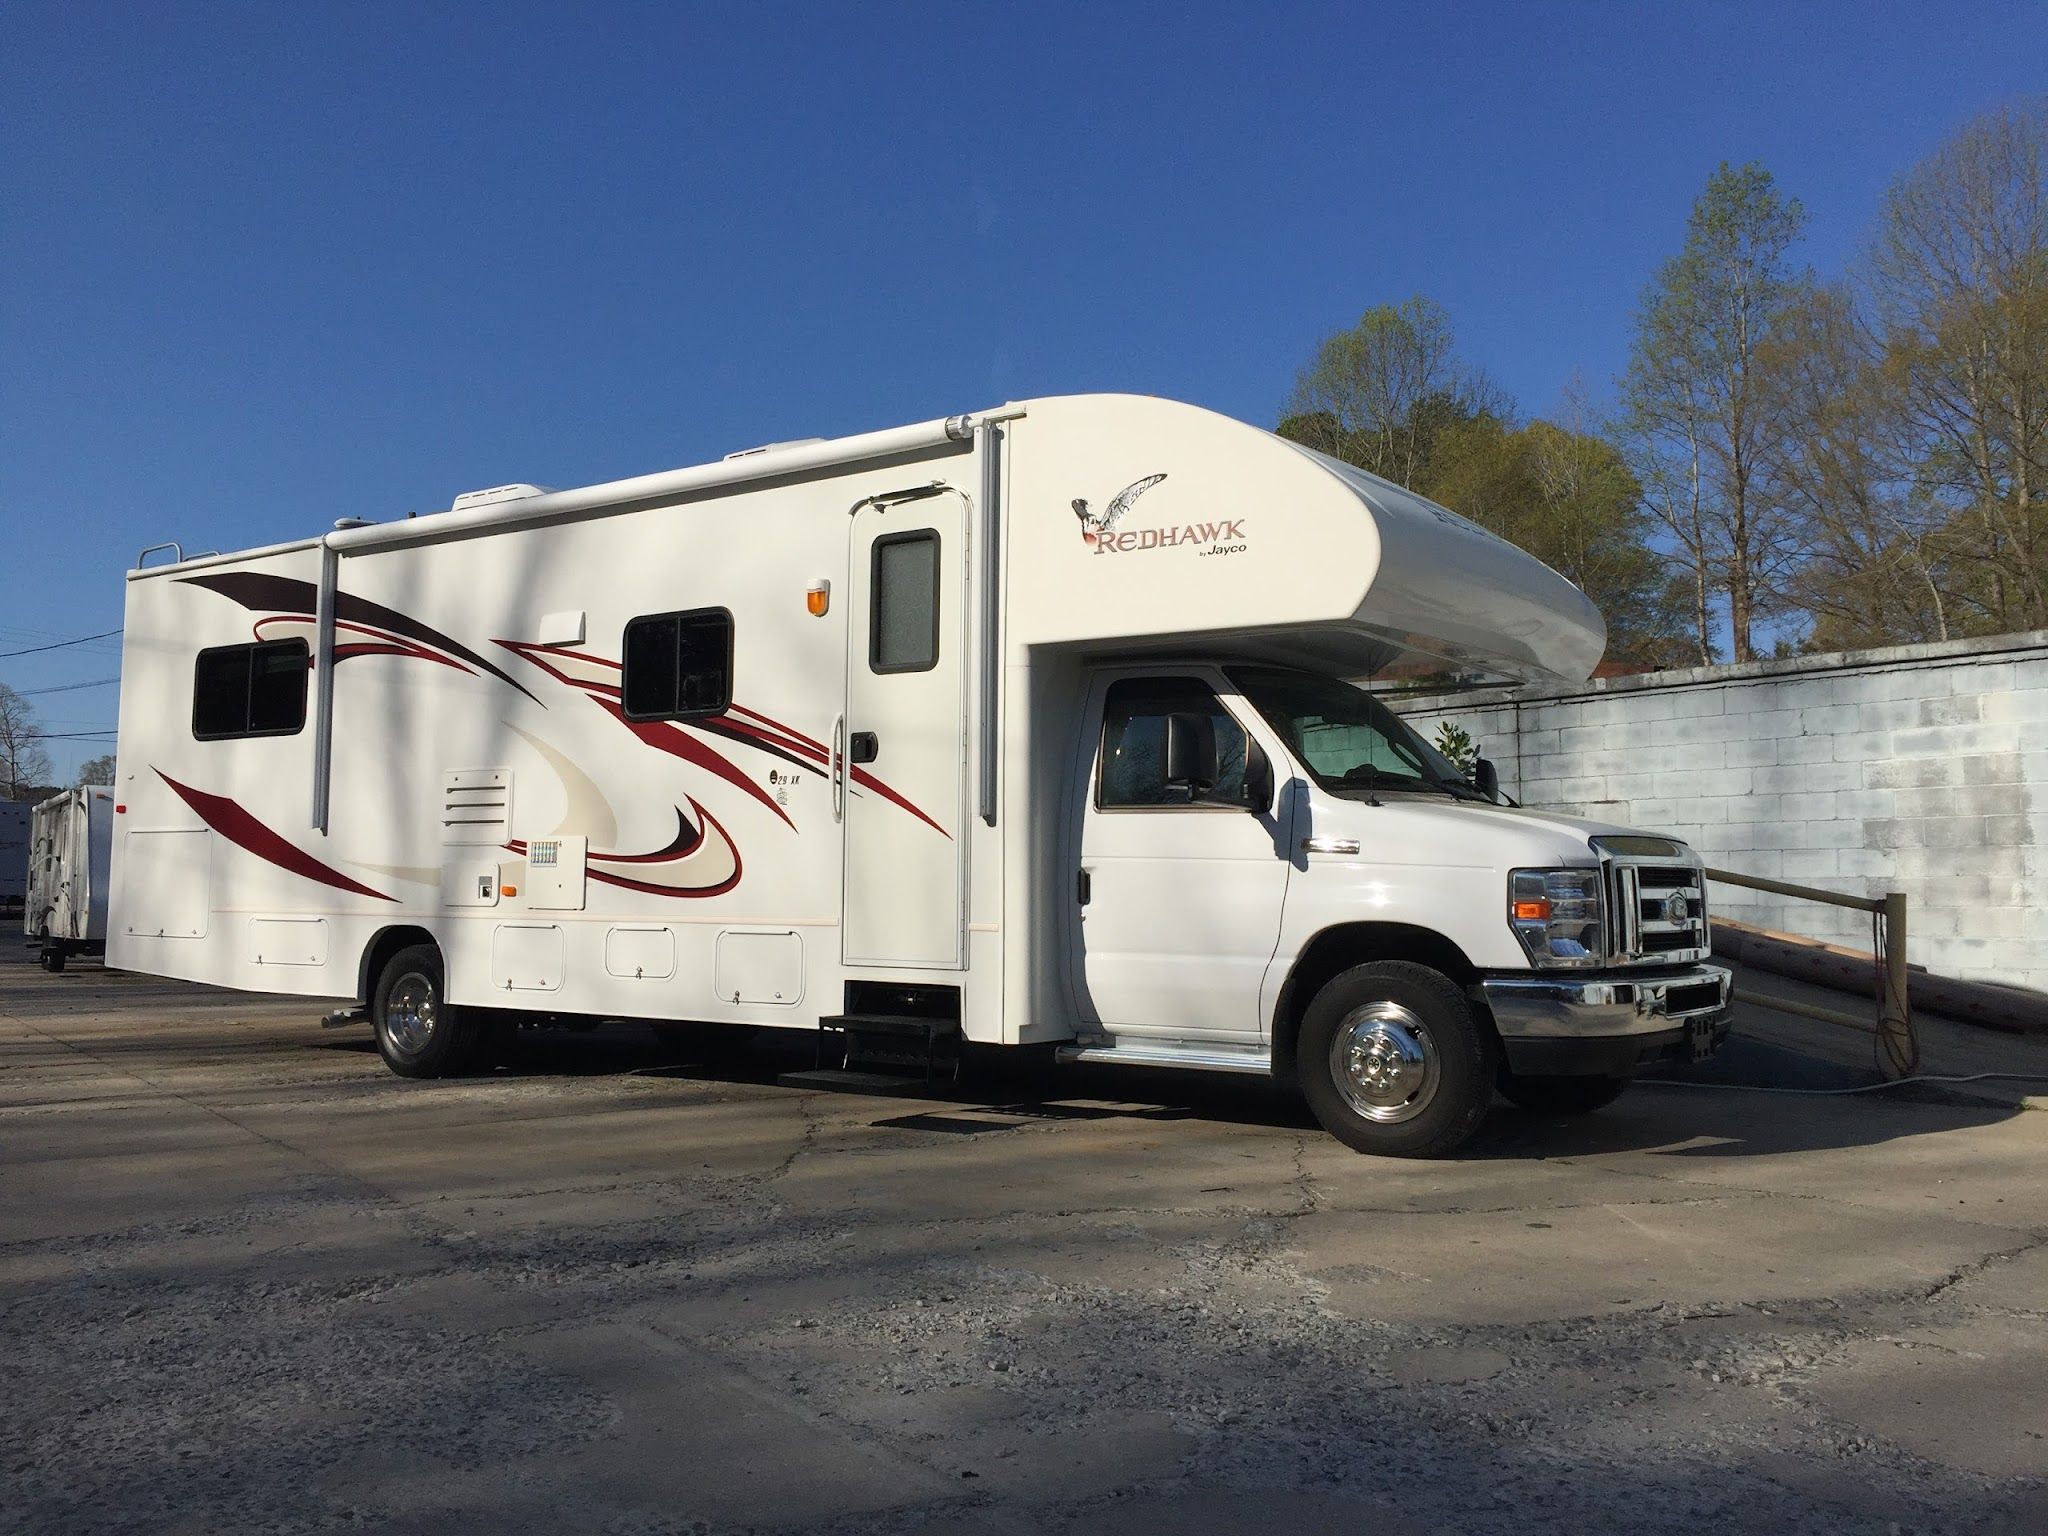 Quality RV Service Parts and Storage